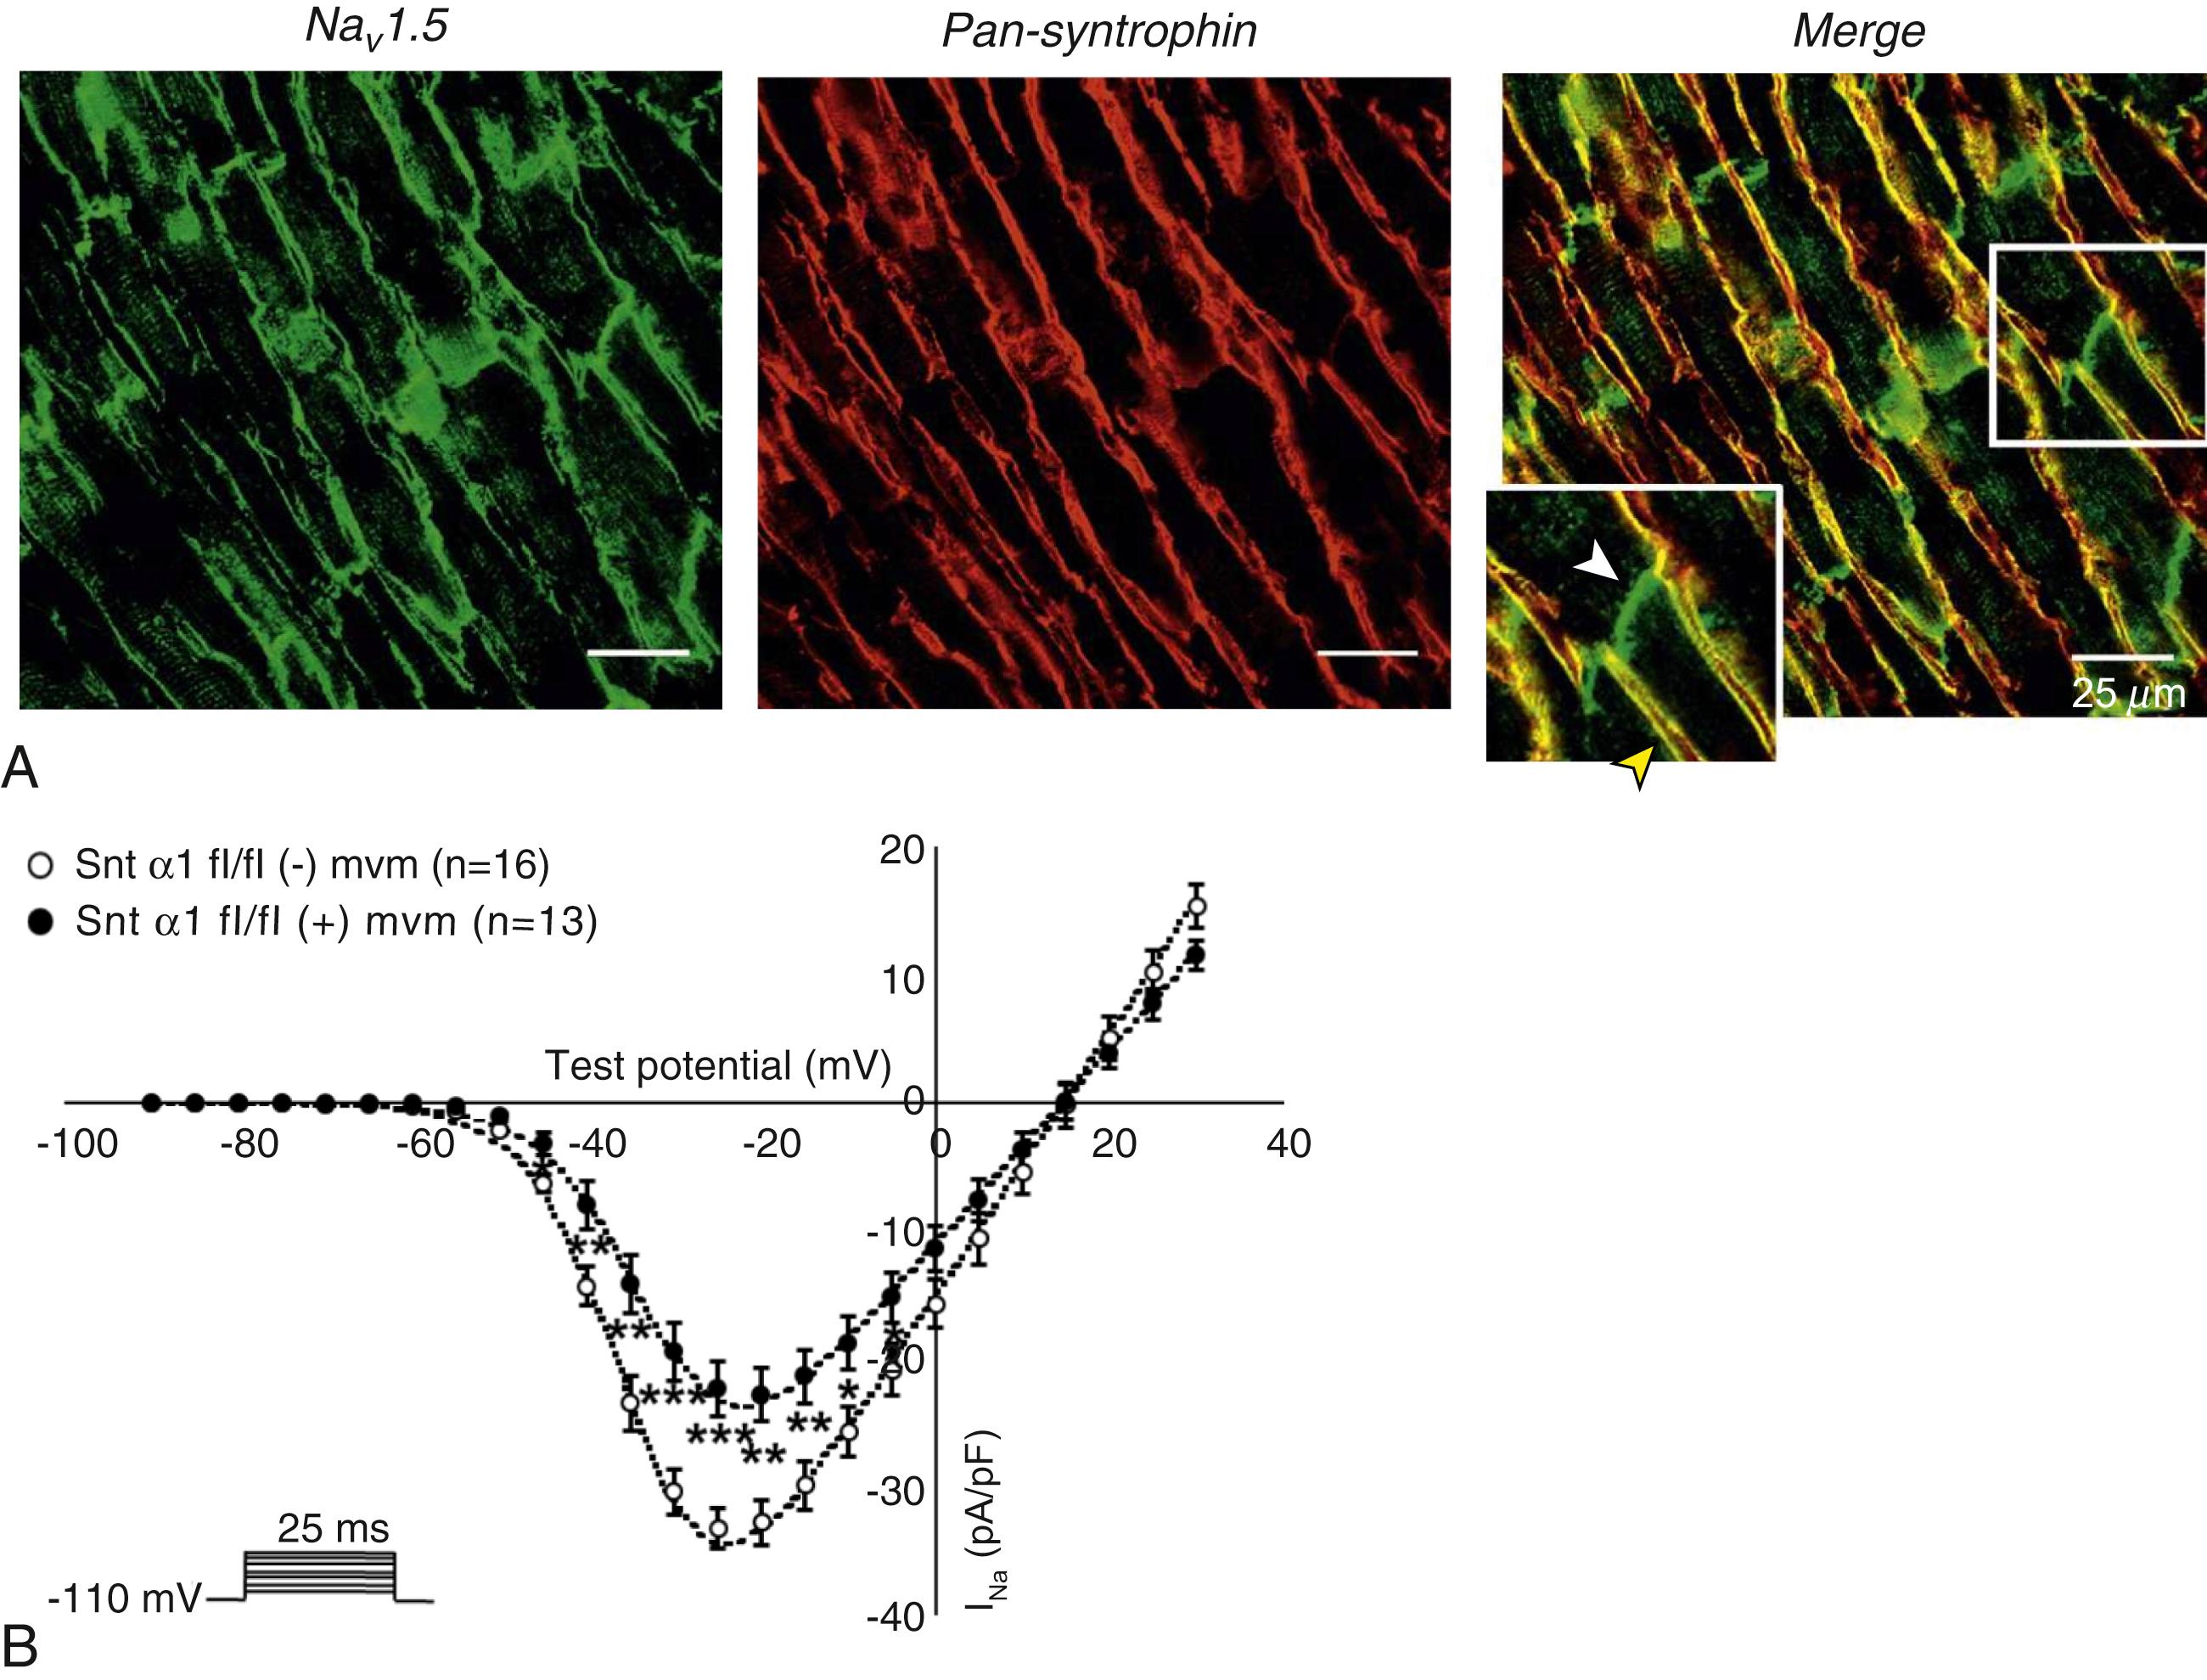 Fig. 18.2, Experimental evidence for multiple pools of Na V 1.5 channels in cardiac cells. (A) Sections of mouse ventricular myocardium with anti-Na V 1.5 staining ( left ), anti–pan-syntrophin staining ( middle ), and overlay ( right, merge ). Syntrophins are not expressed at the intercalated discs ( white arrowhead ) where Na V 1.5 is present. The intercalated disc pool of Na V 1.5 has been proposed to interact with SAP97 (see Fig. 18.1 ). Yellow arrowhead shows the lateral membrane pool of Na V 1.5 colocalizing with syntrophin proteins. (B) Syntrophin knockout cardiomyocytes (Sntα1 fl/fl (+) mvm) show reduced whole-cell sodium current compared with controls (Sntα1 fl/fl (–) mvm). (∗ P < .05; ∗∗ P < .01; ∗∗∗ P < .001).